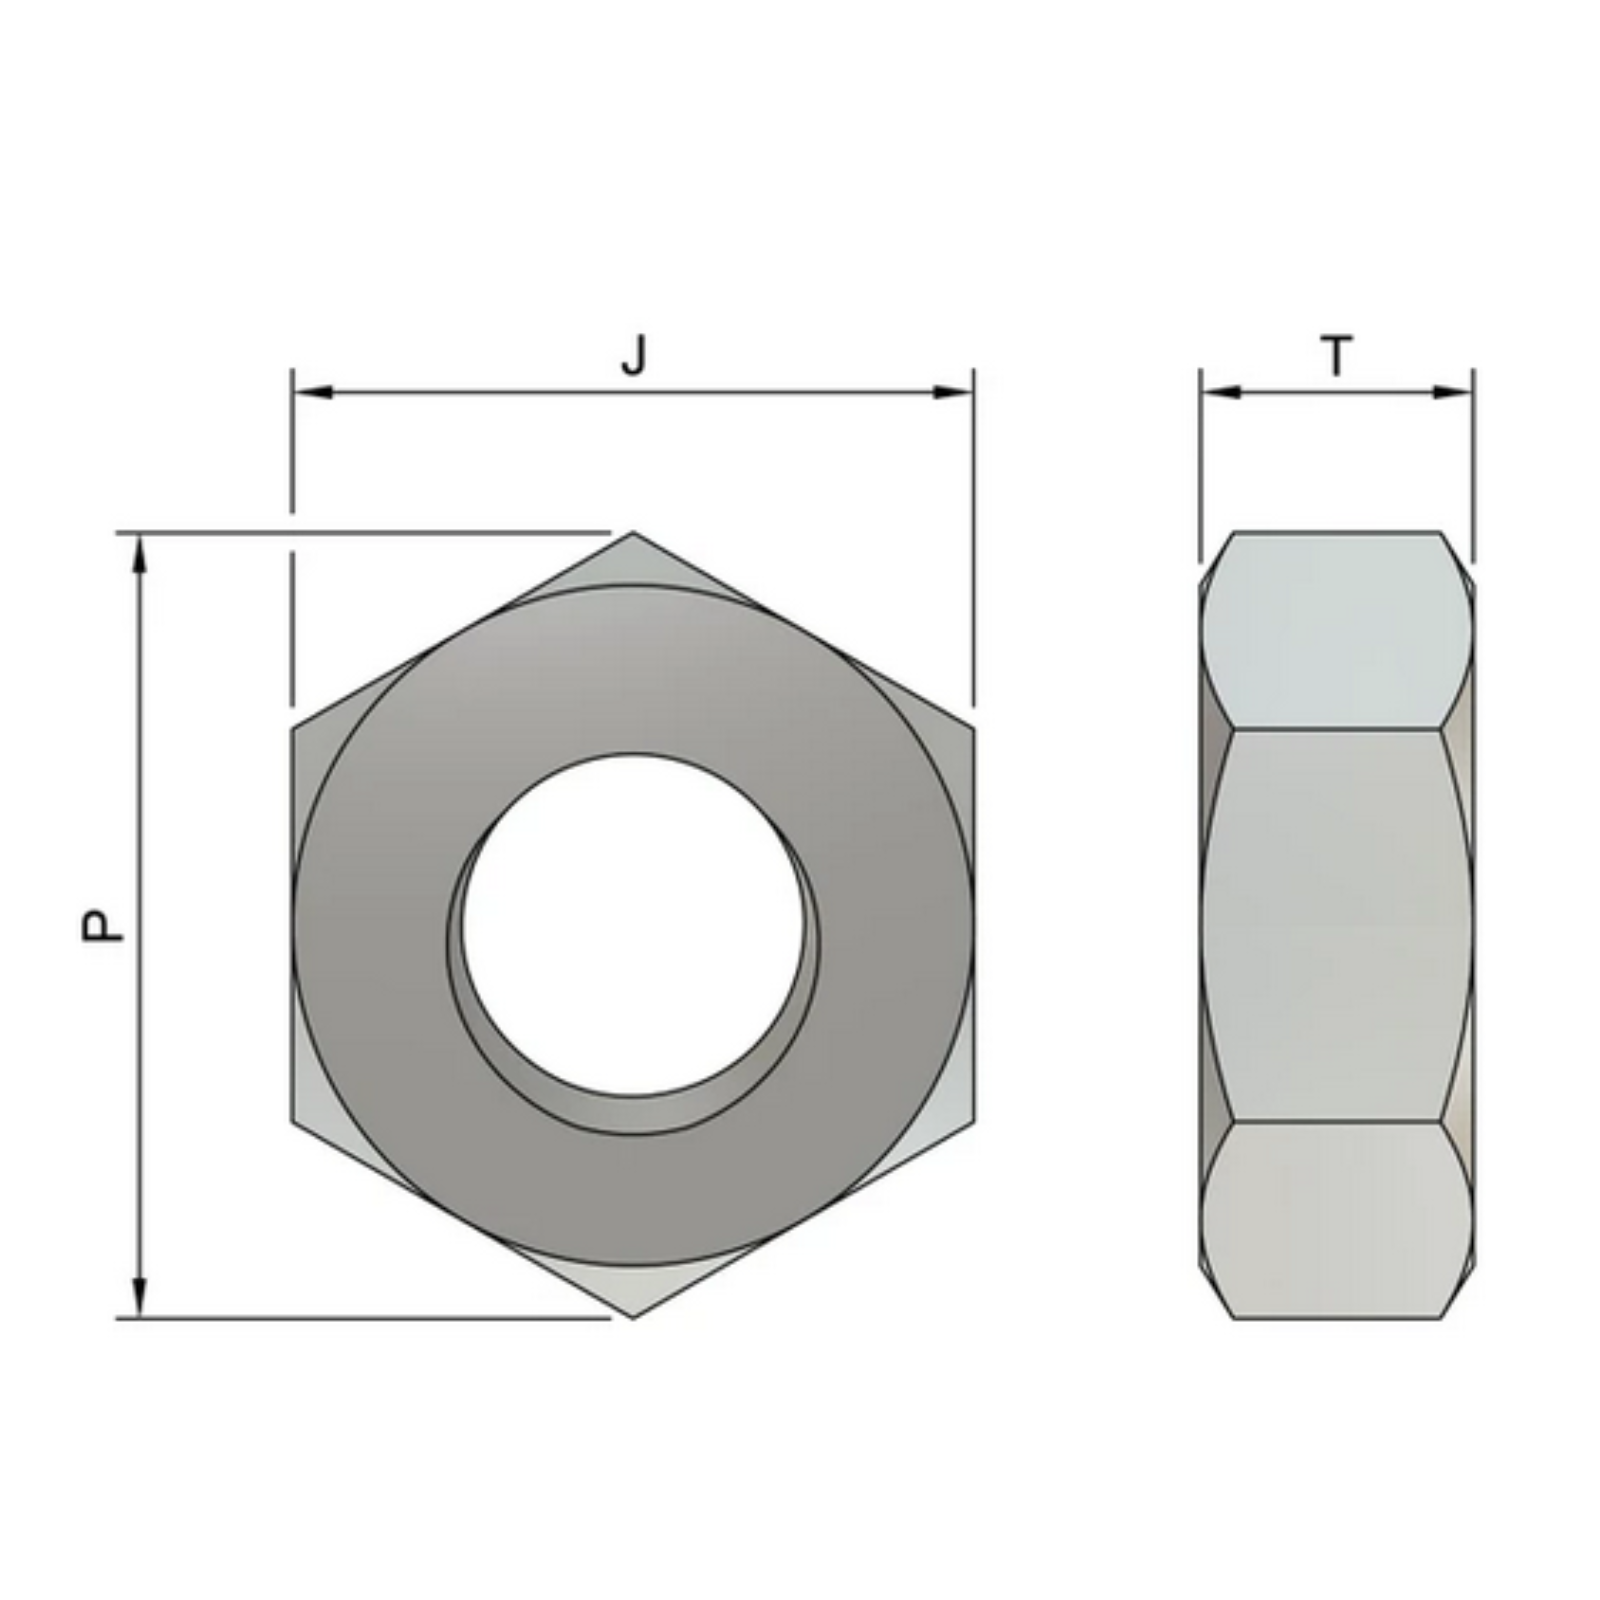 M2 Hexagon Nuts (DIN 934) - Stainless Steel (A4)